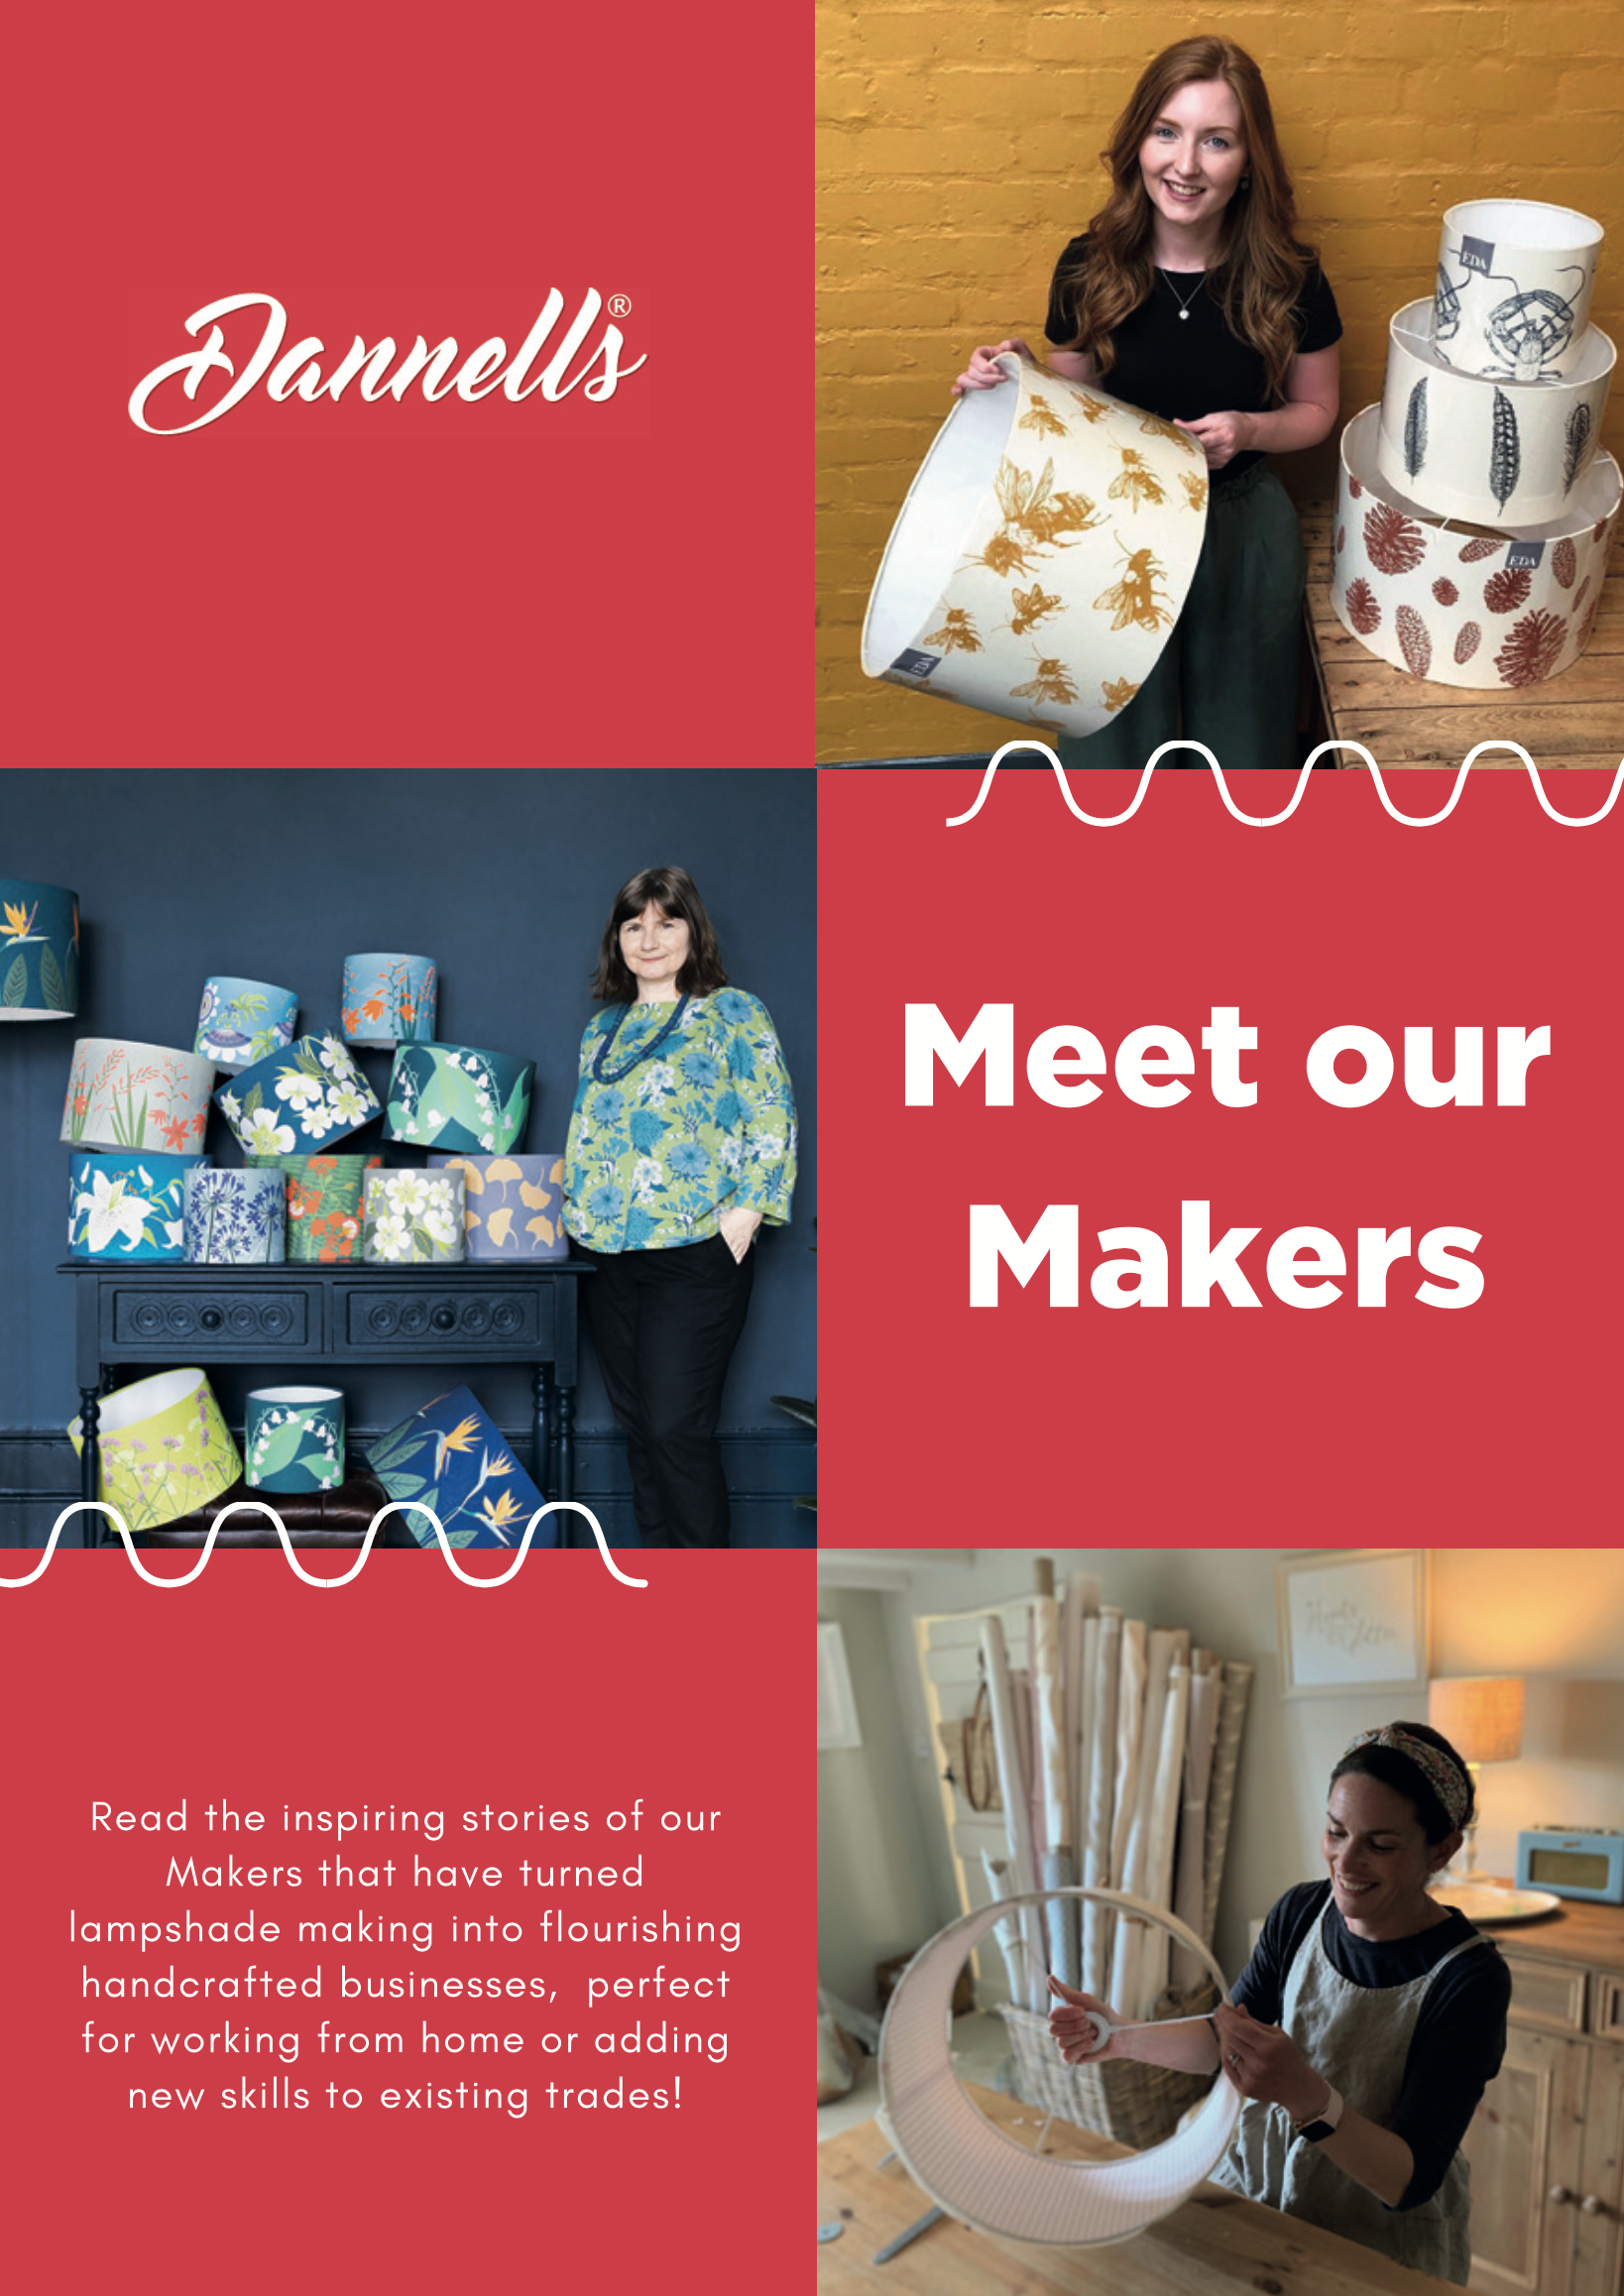 Meet our Makers - Dannells